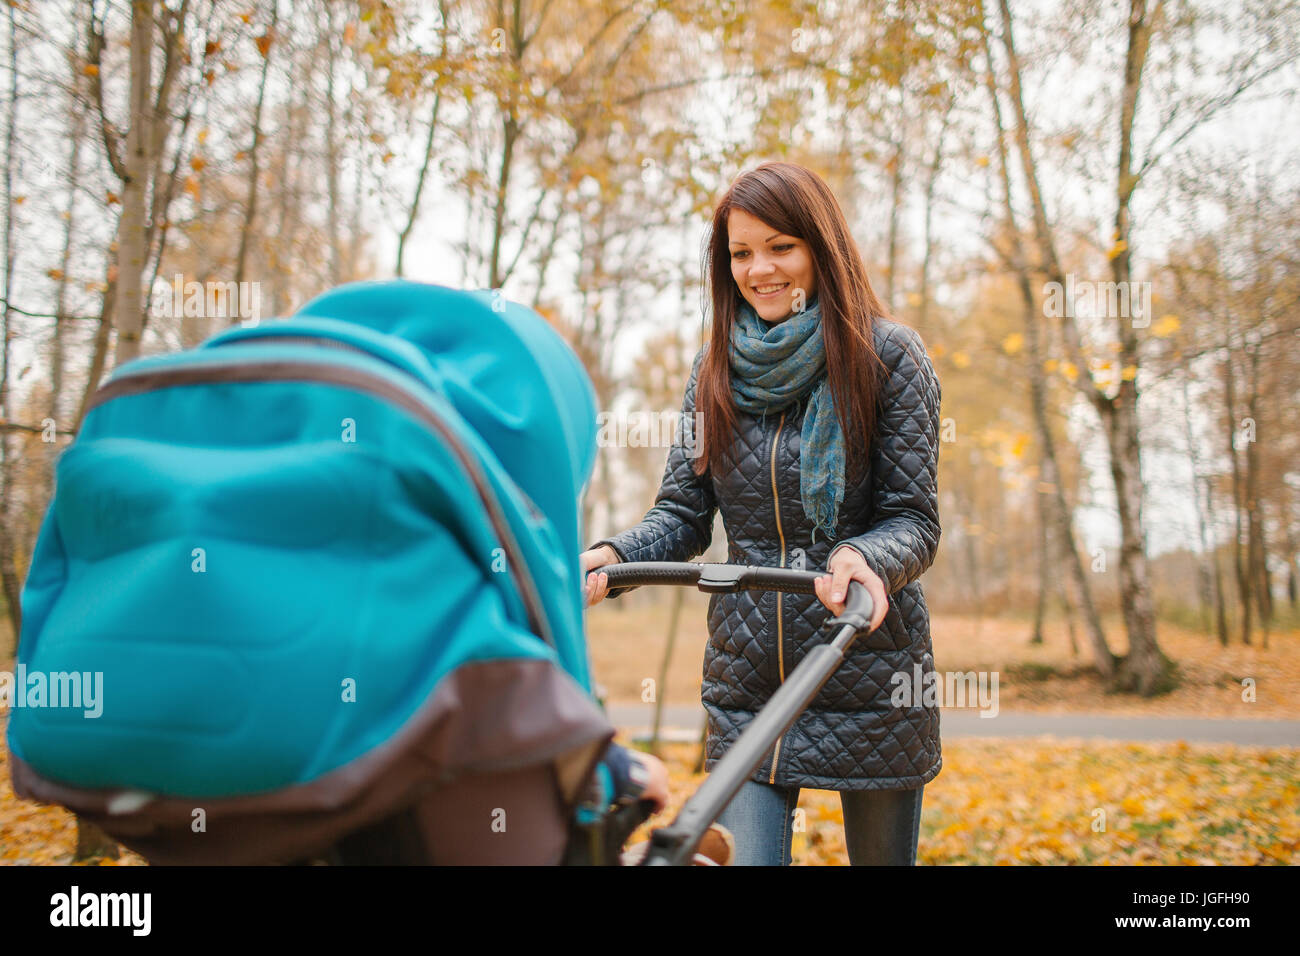 Smiling Middle Eastern woman pushing stroller in park Banque D'Images